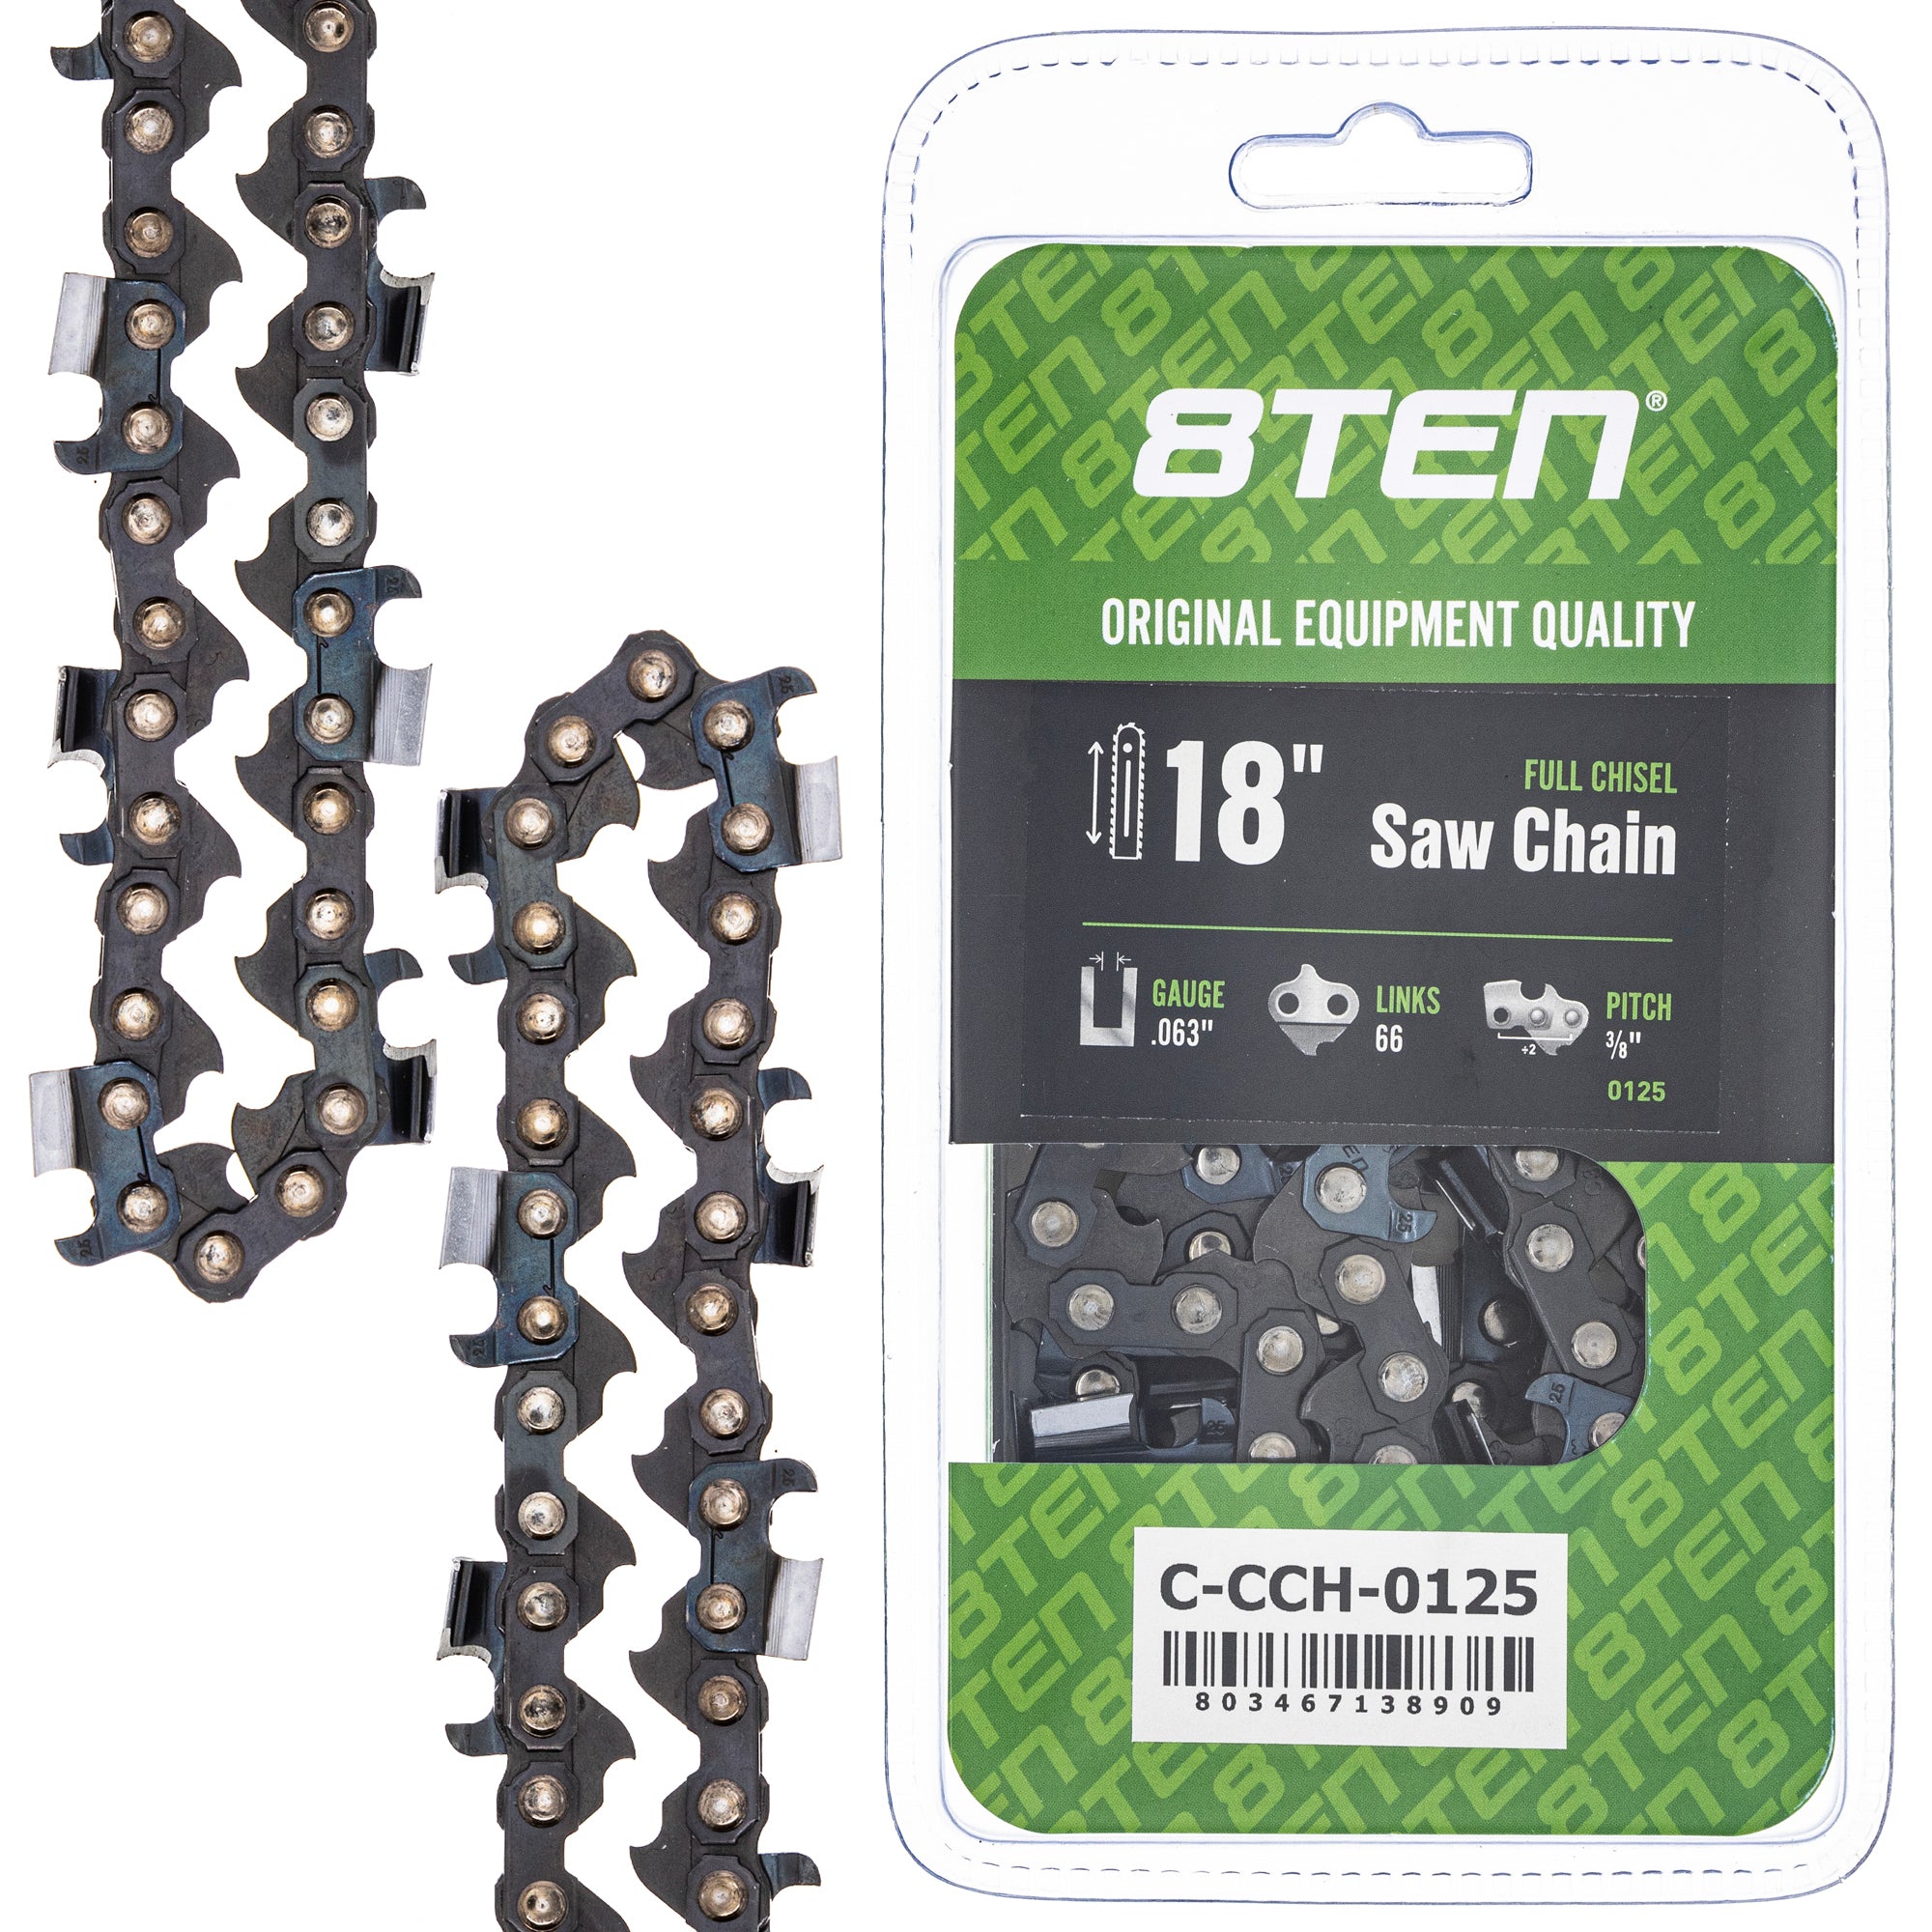 8TEN MK1010302 Guide Bar & Chain for MSE MS E 066